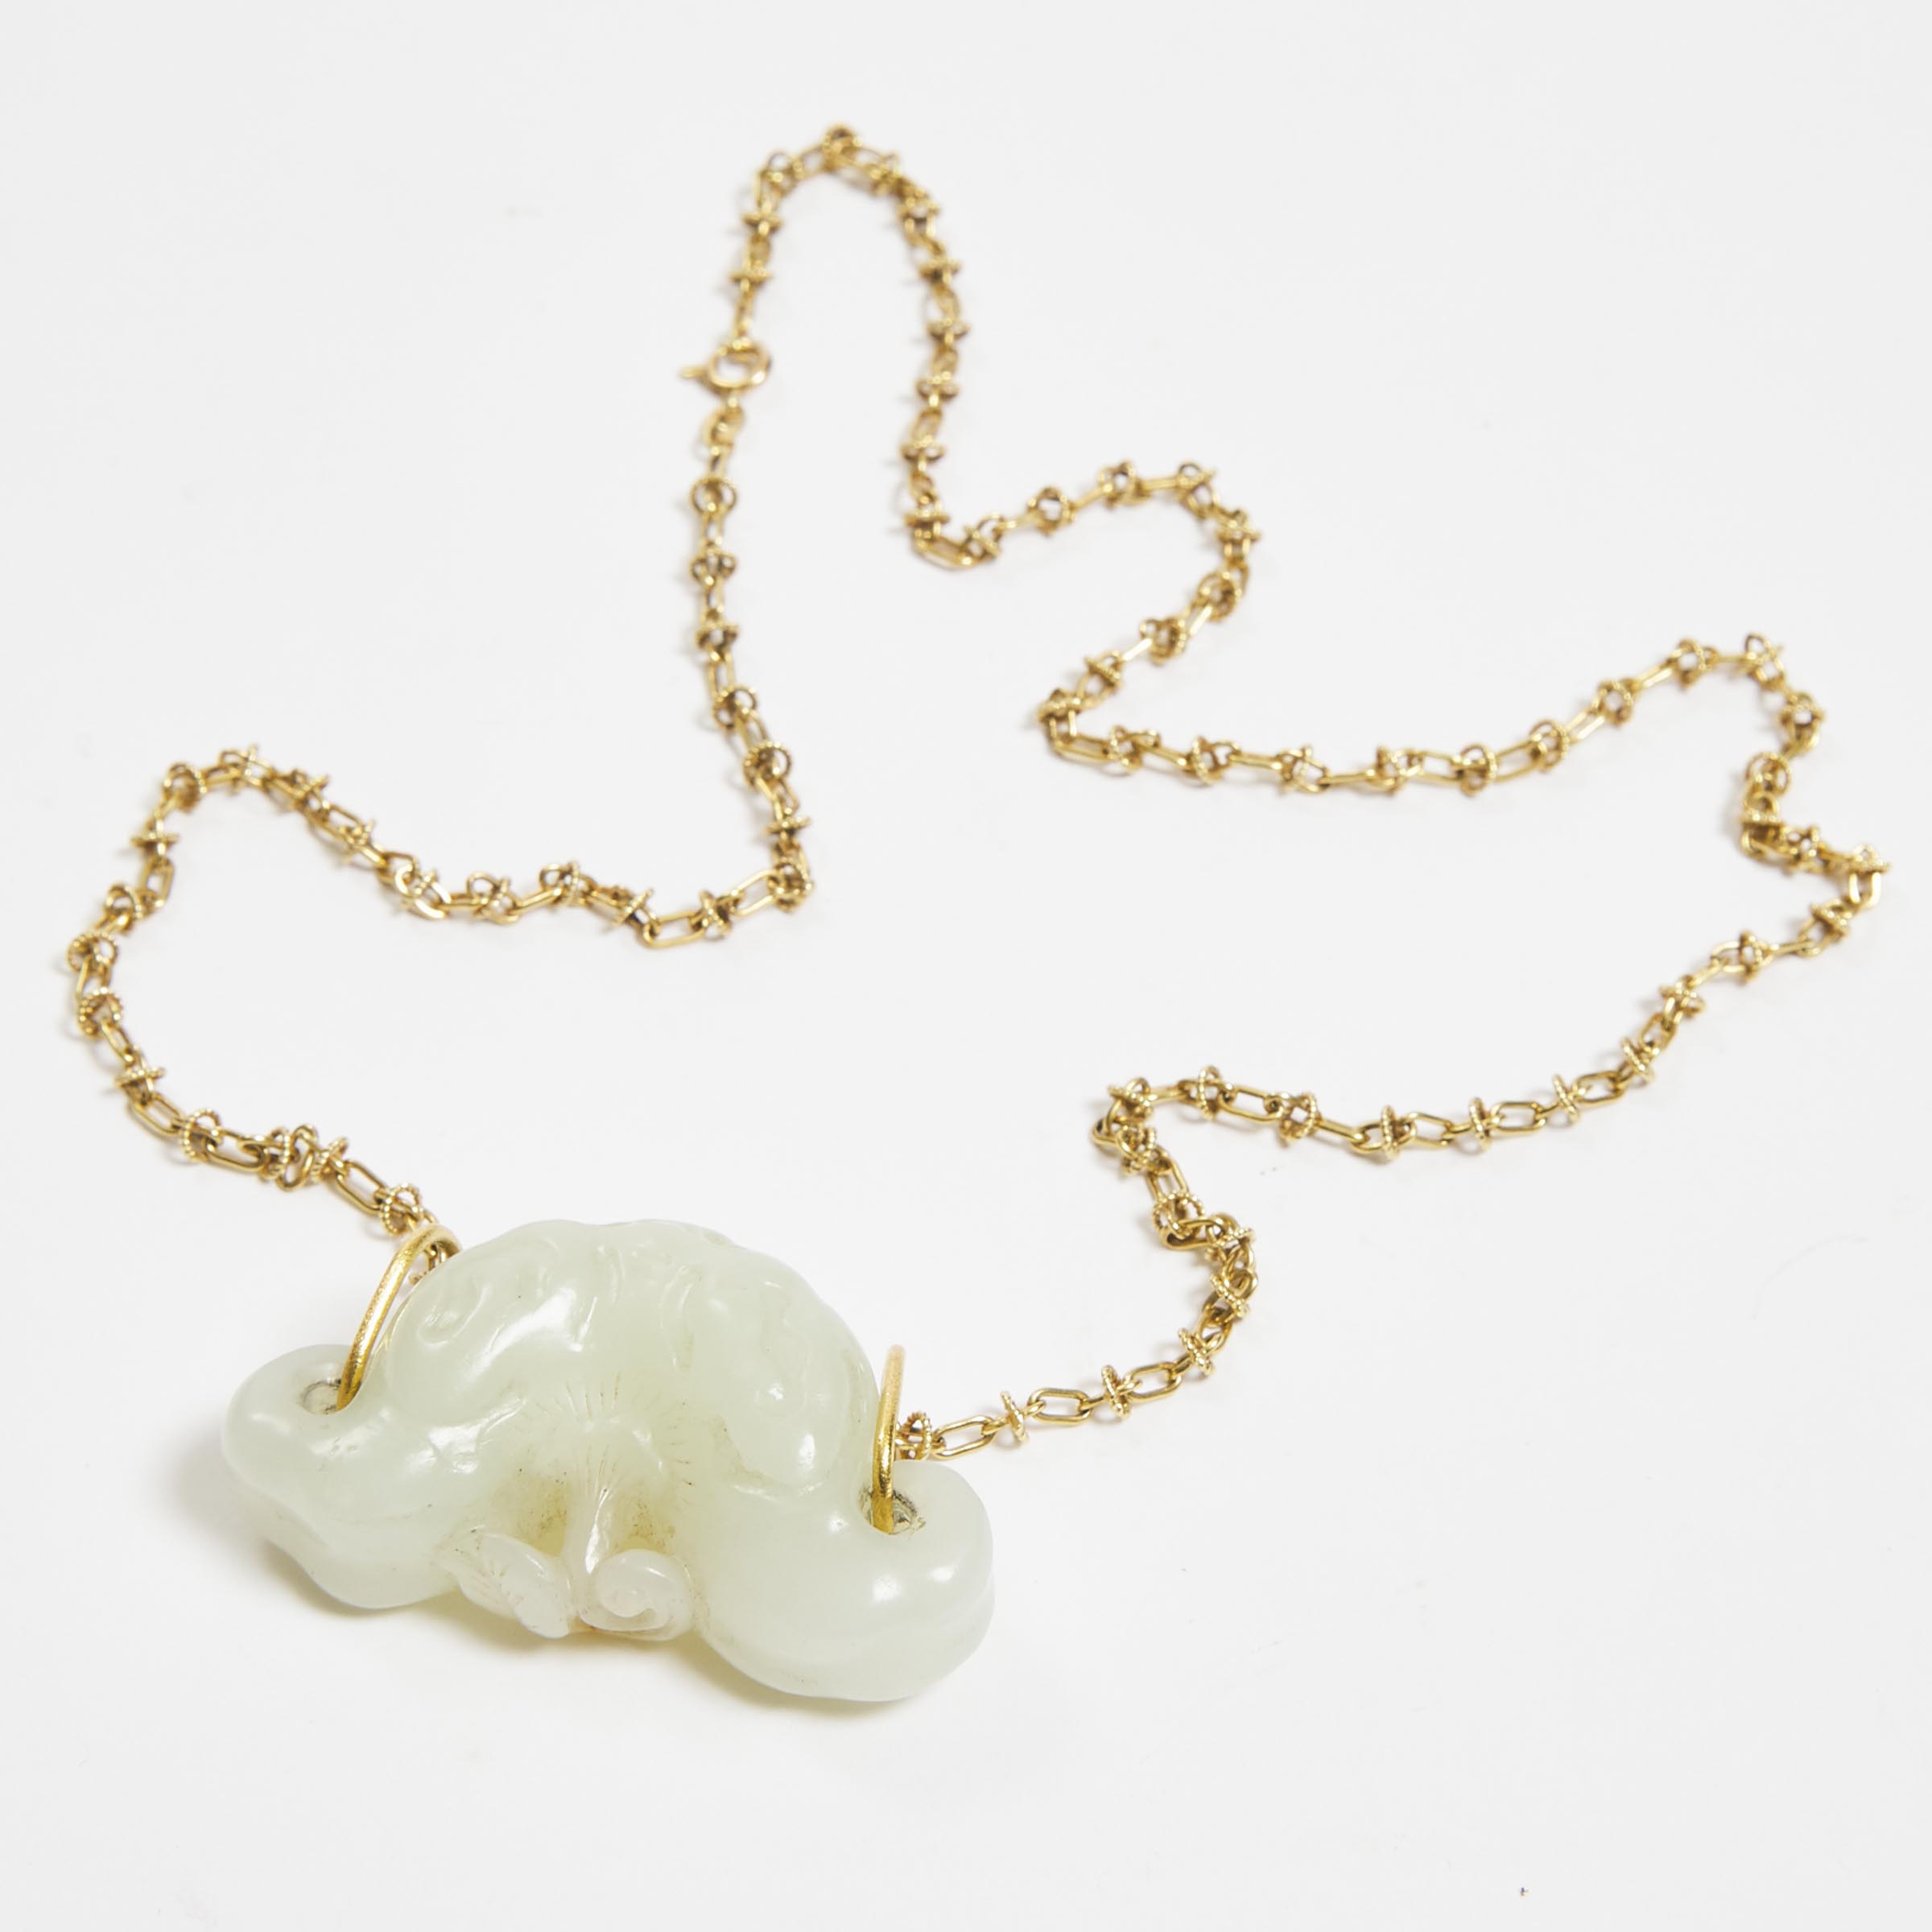 A White Jade Carving of a Water Caltrop, Qing Dynasty, 18th/19th Century